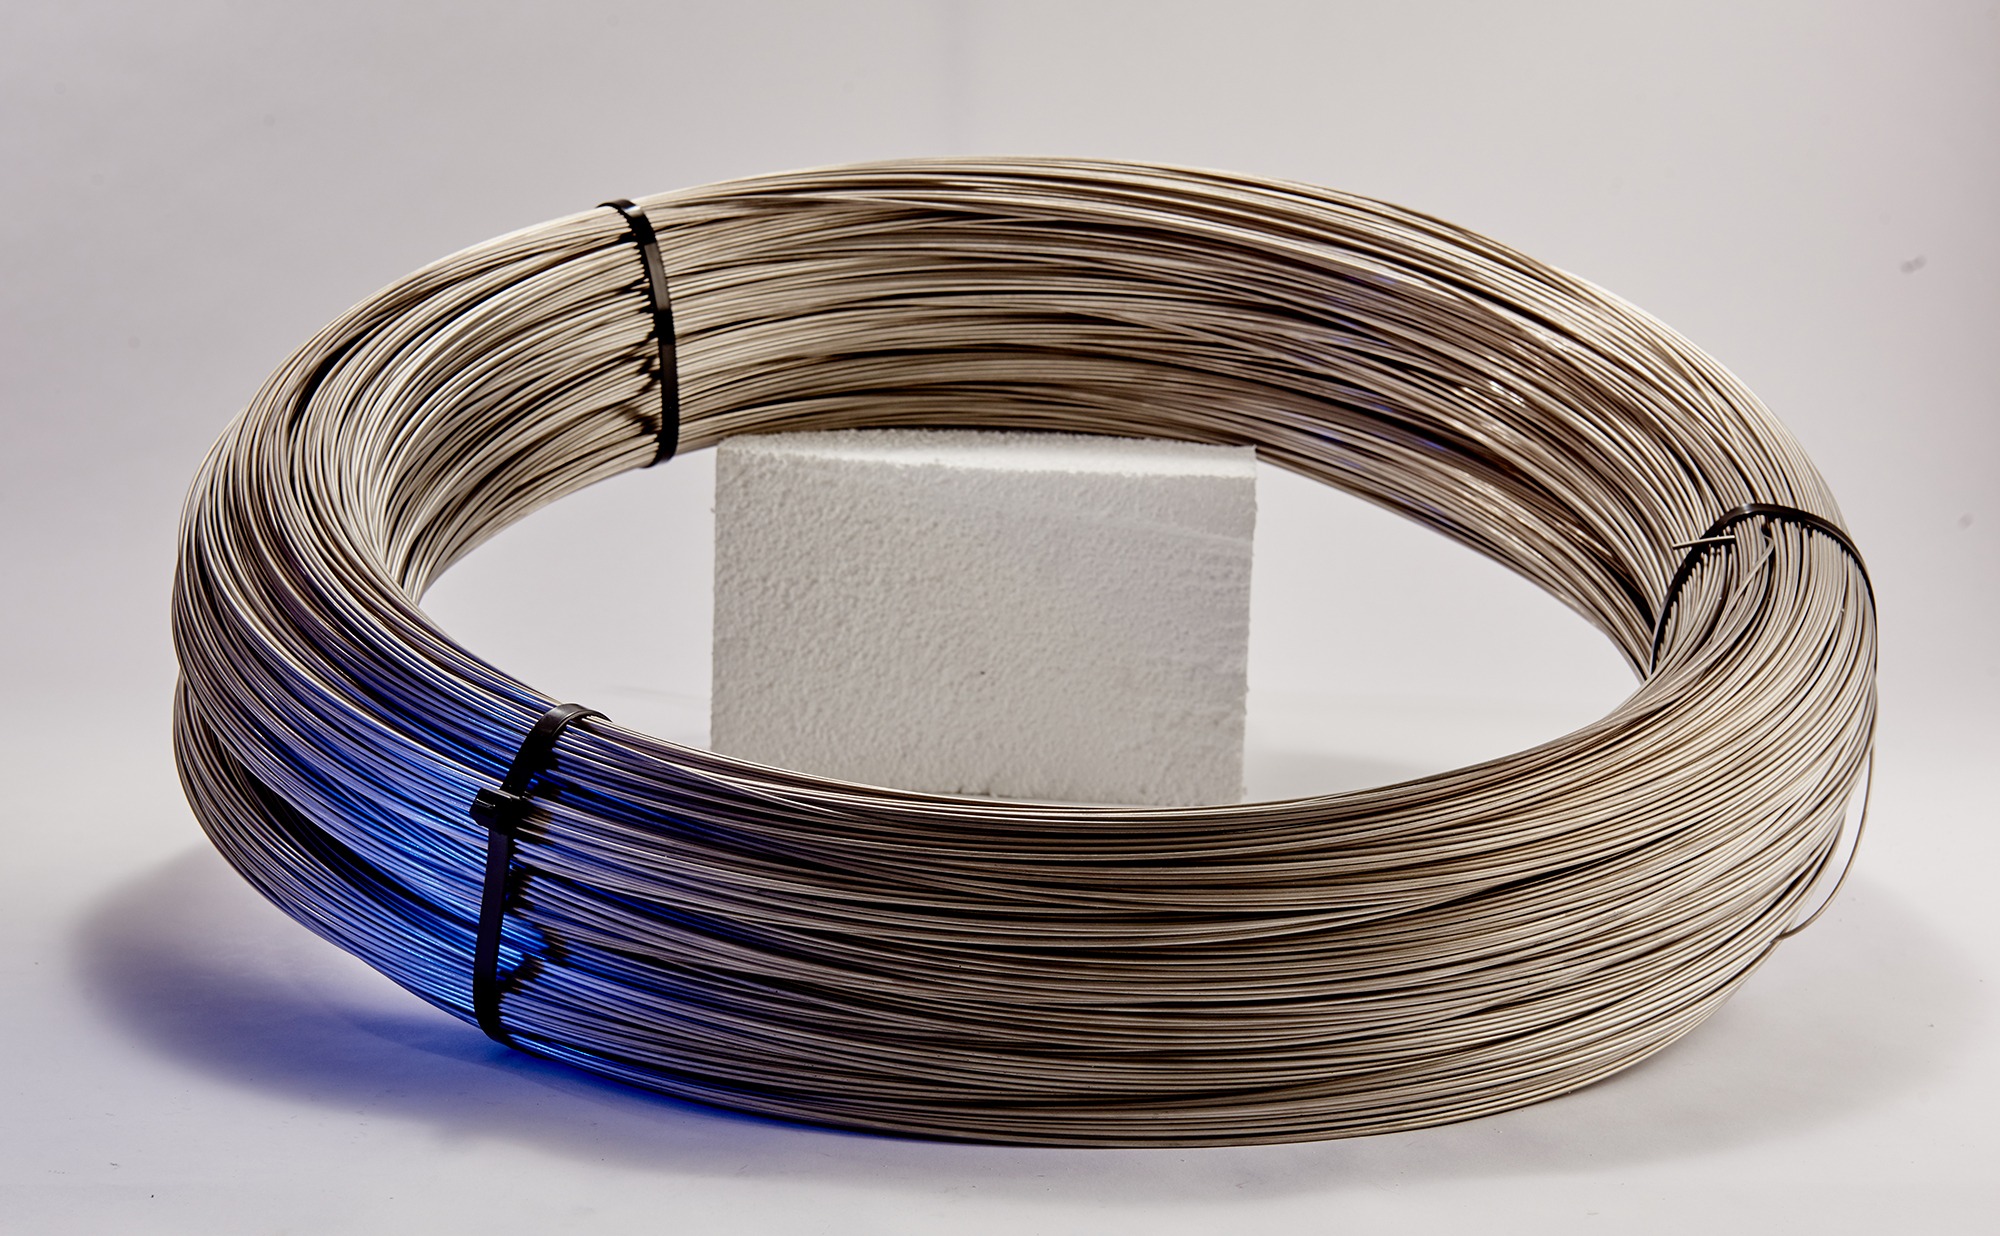 Nimonic® 75 is available in bars and wire rope